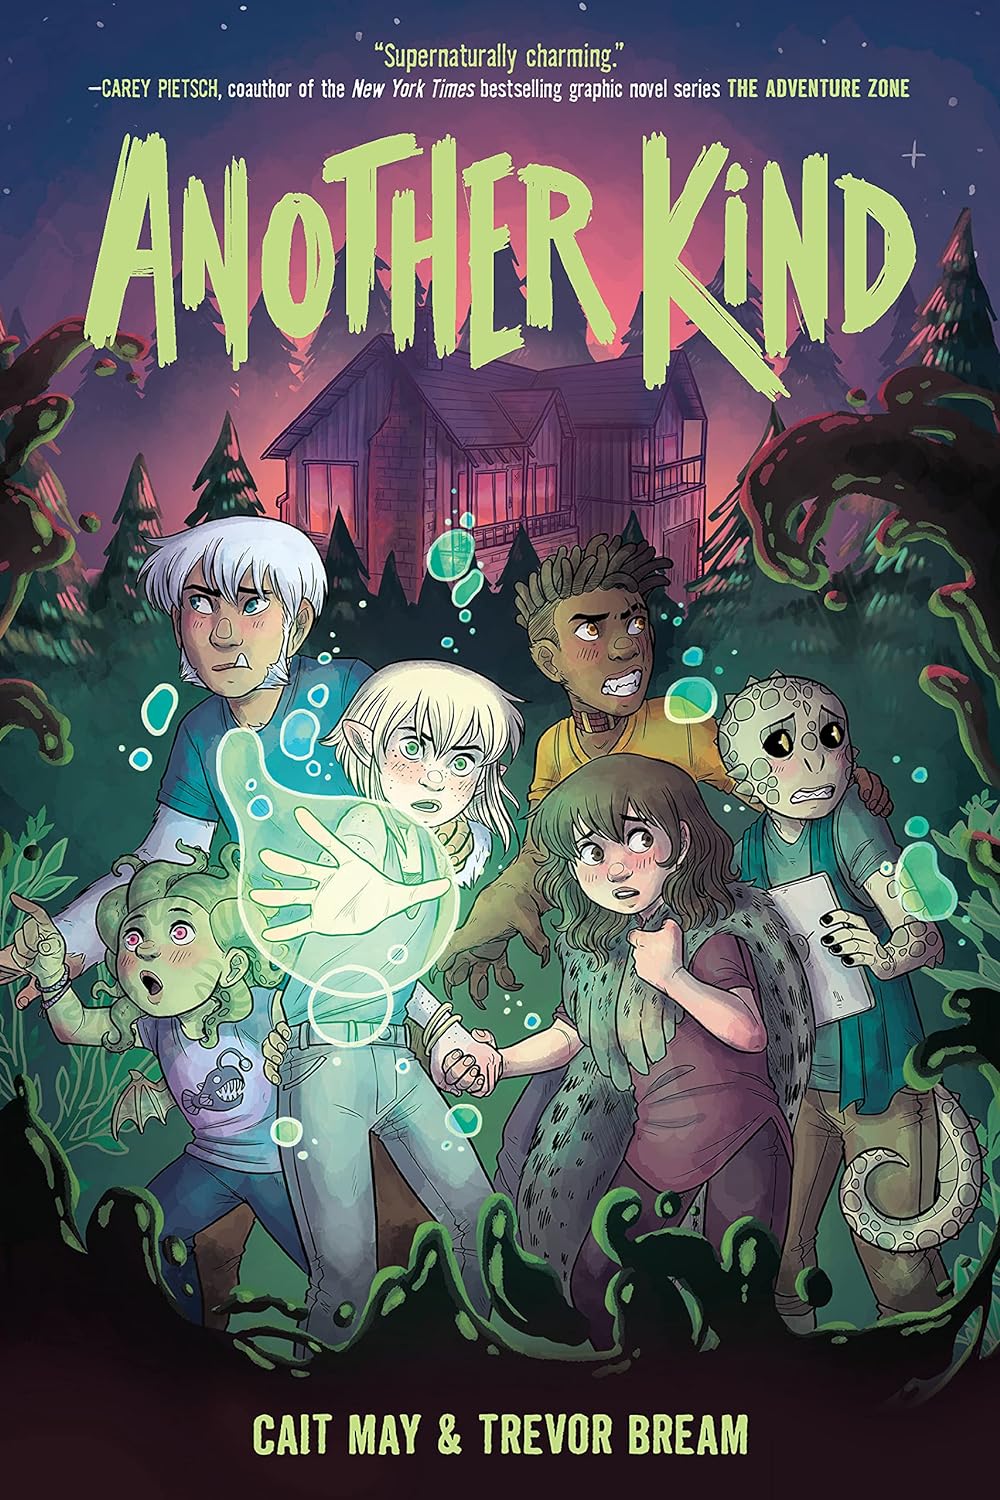 Image for "Another Kind"